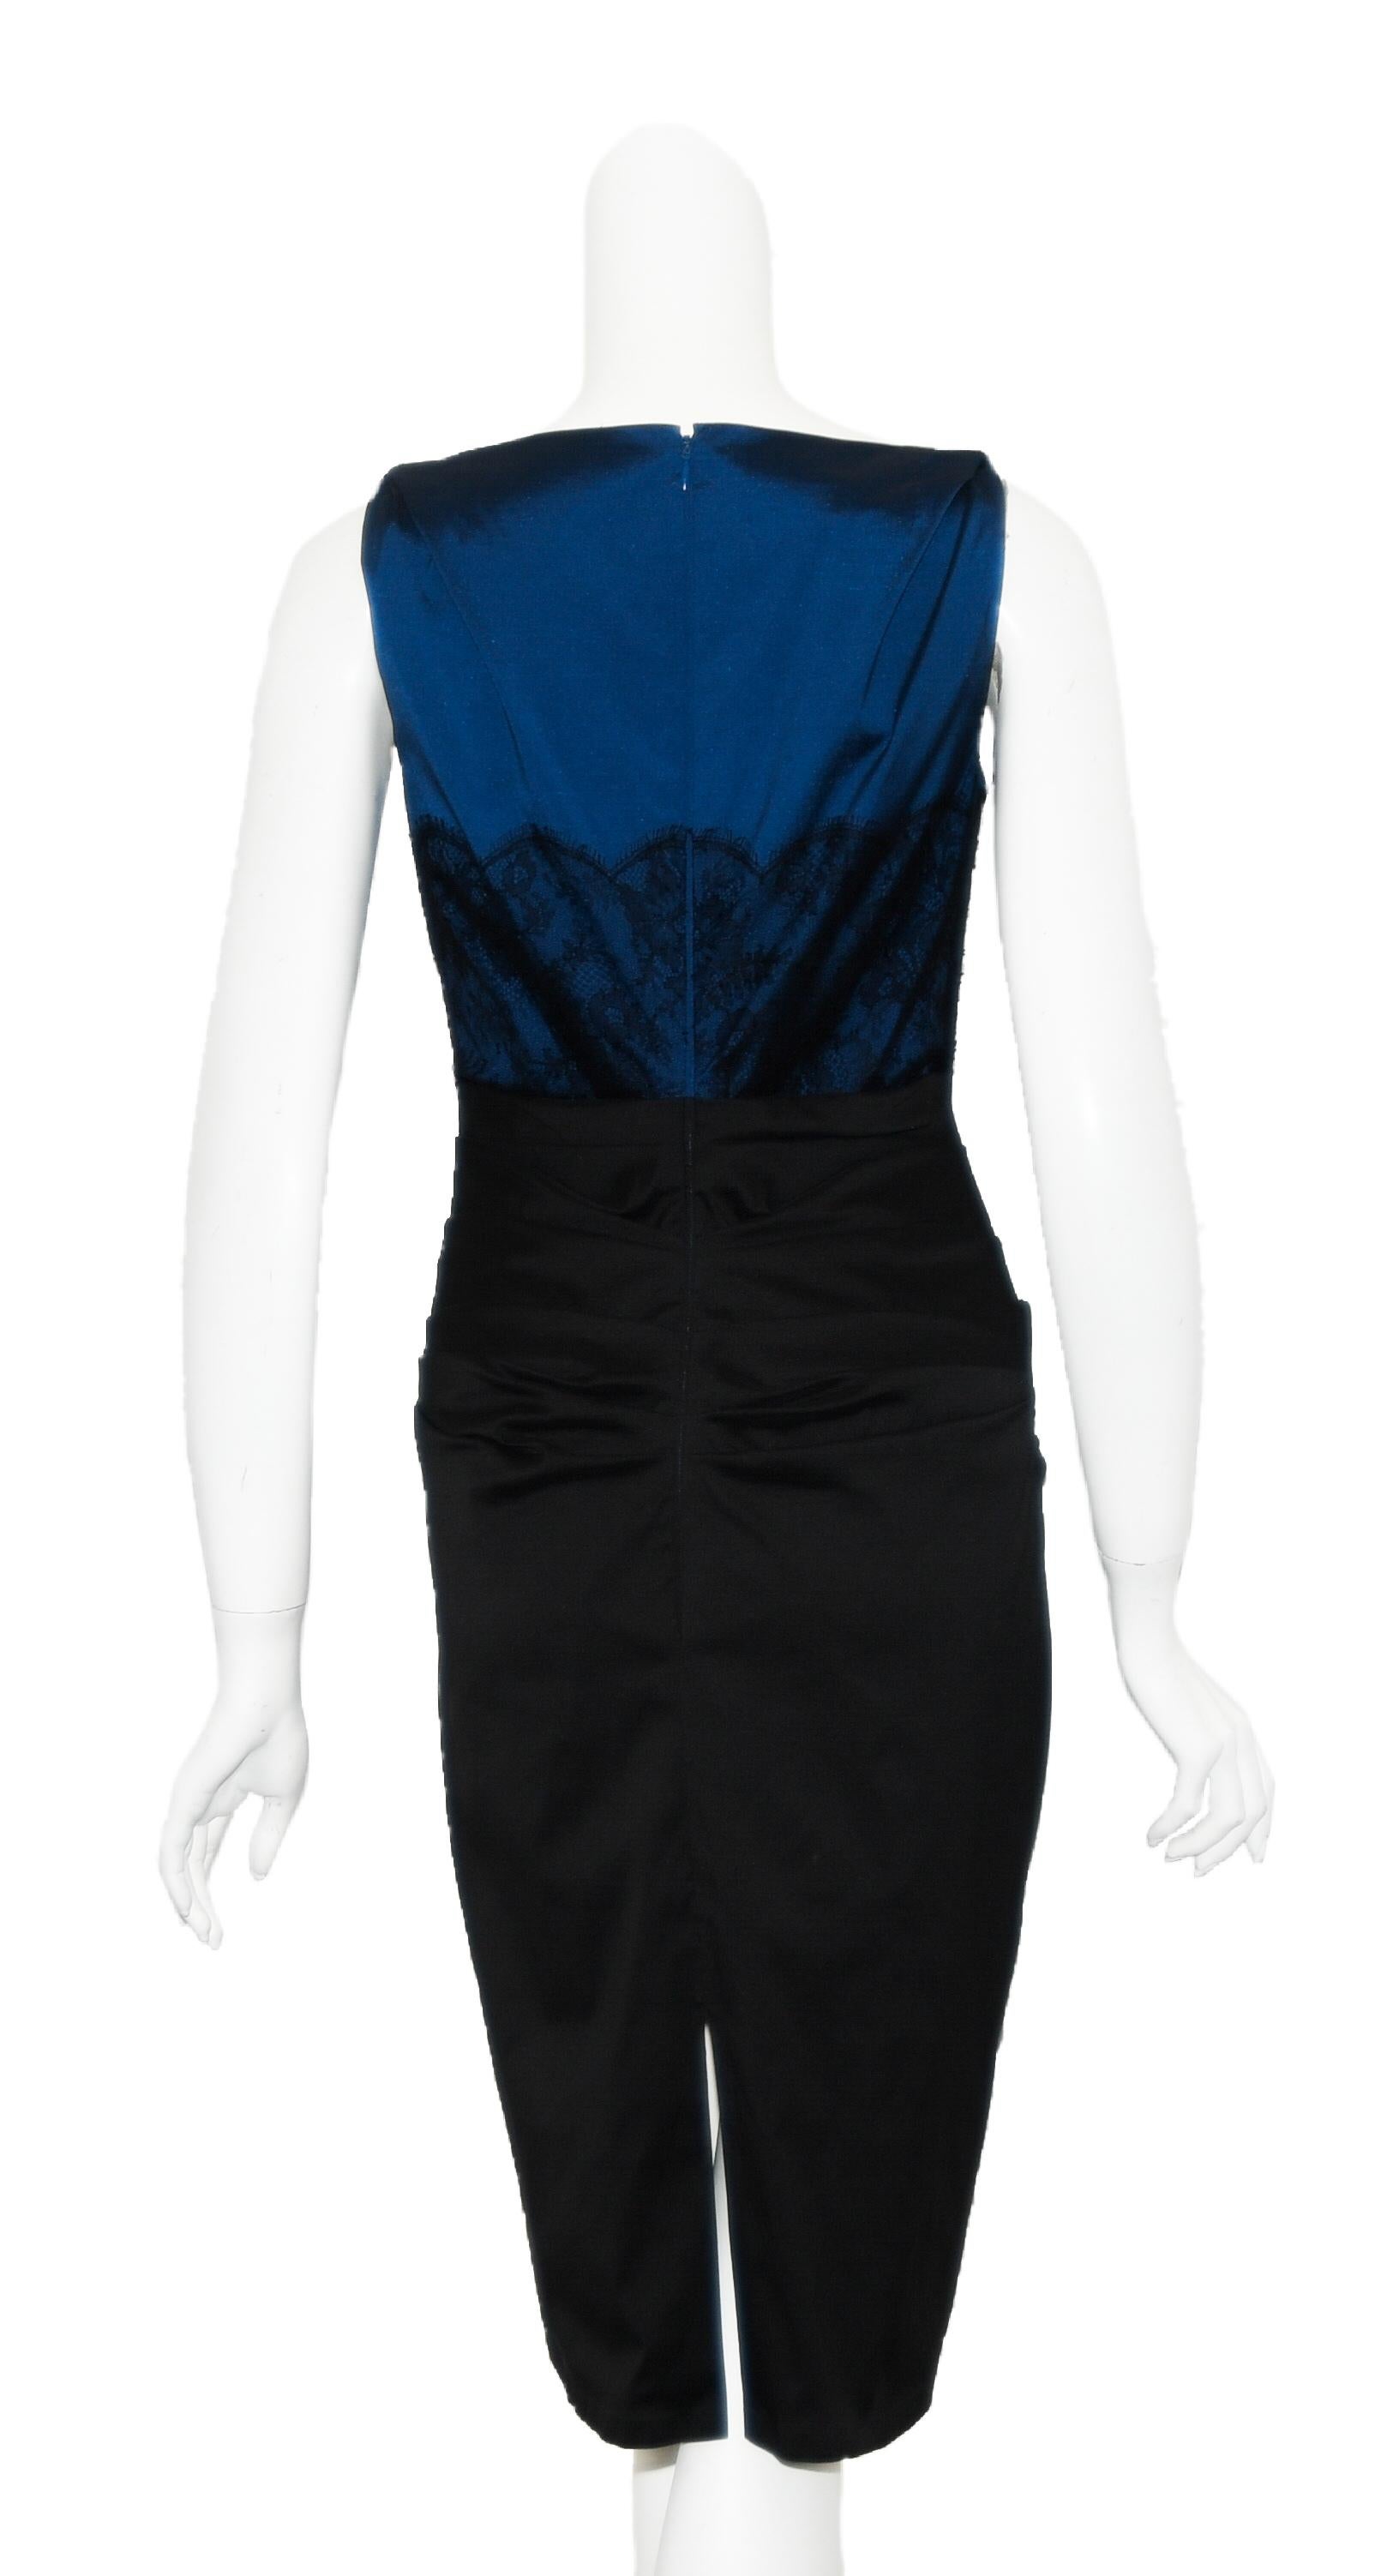 blue dress with black lace overlay